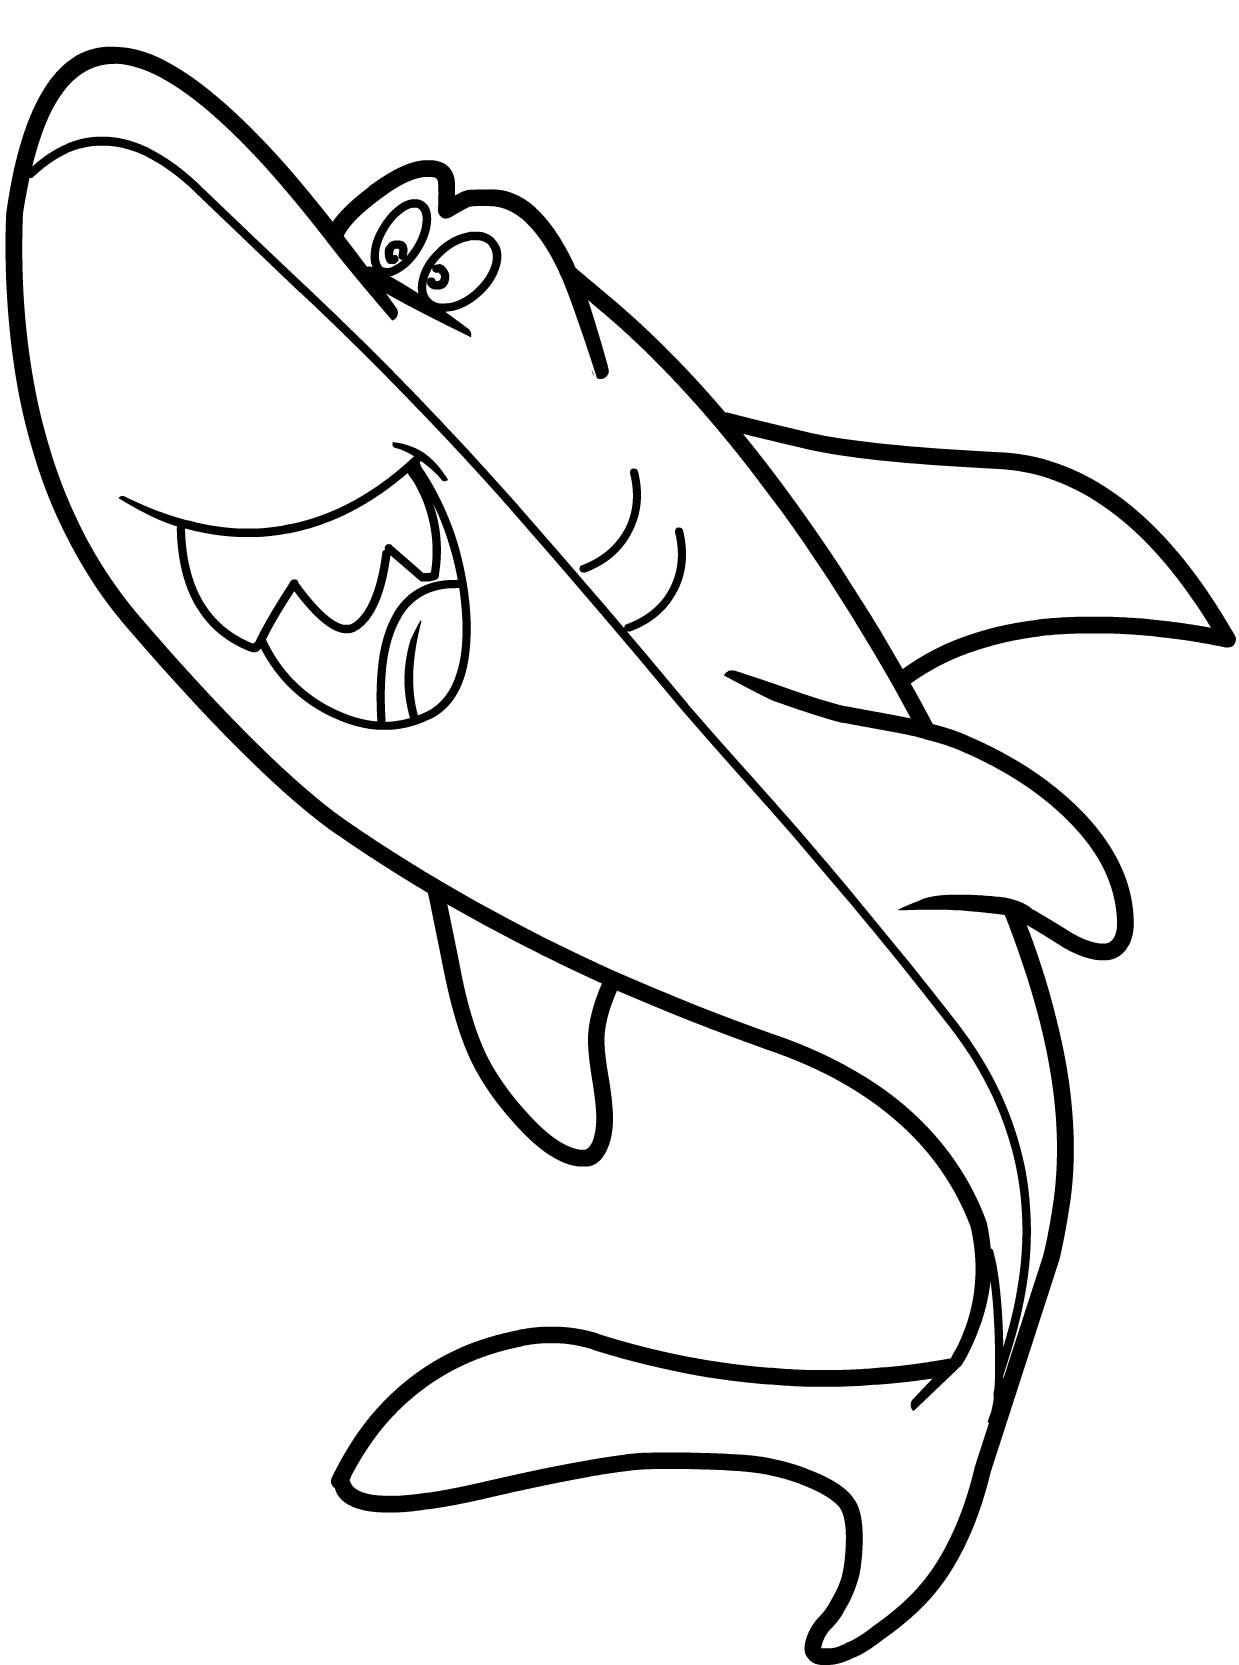 Draw a Cartoon Shark - Coloring In Your Shark